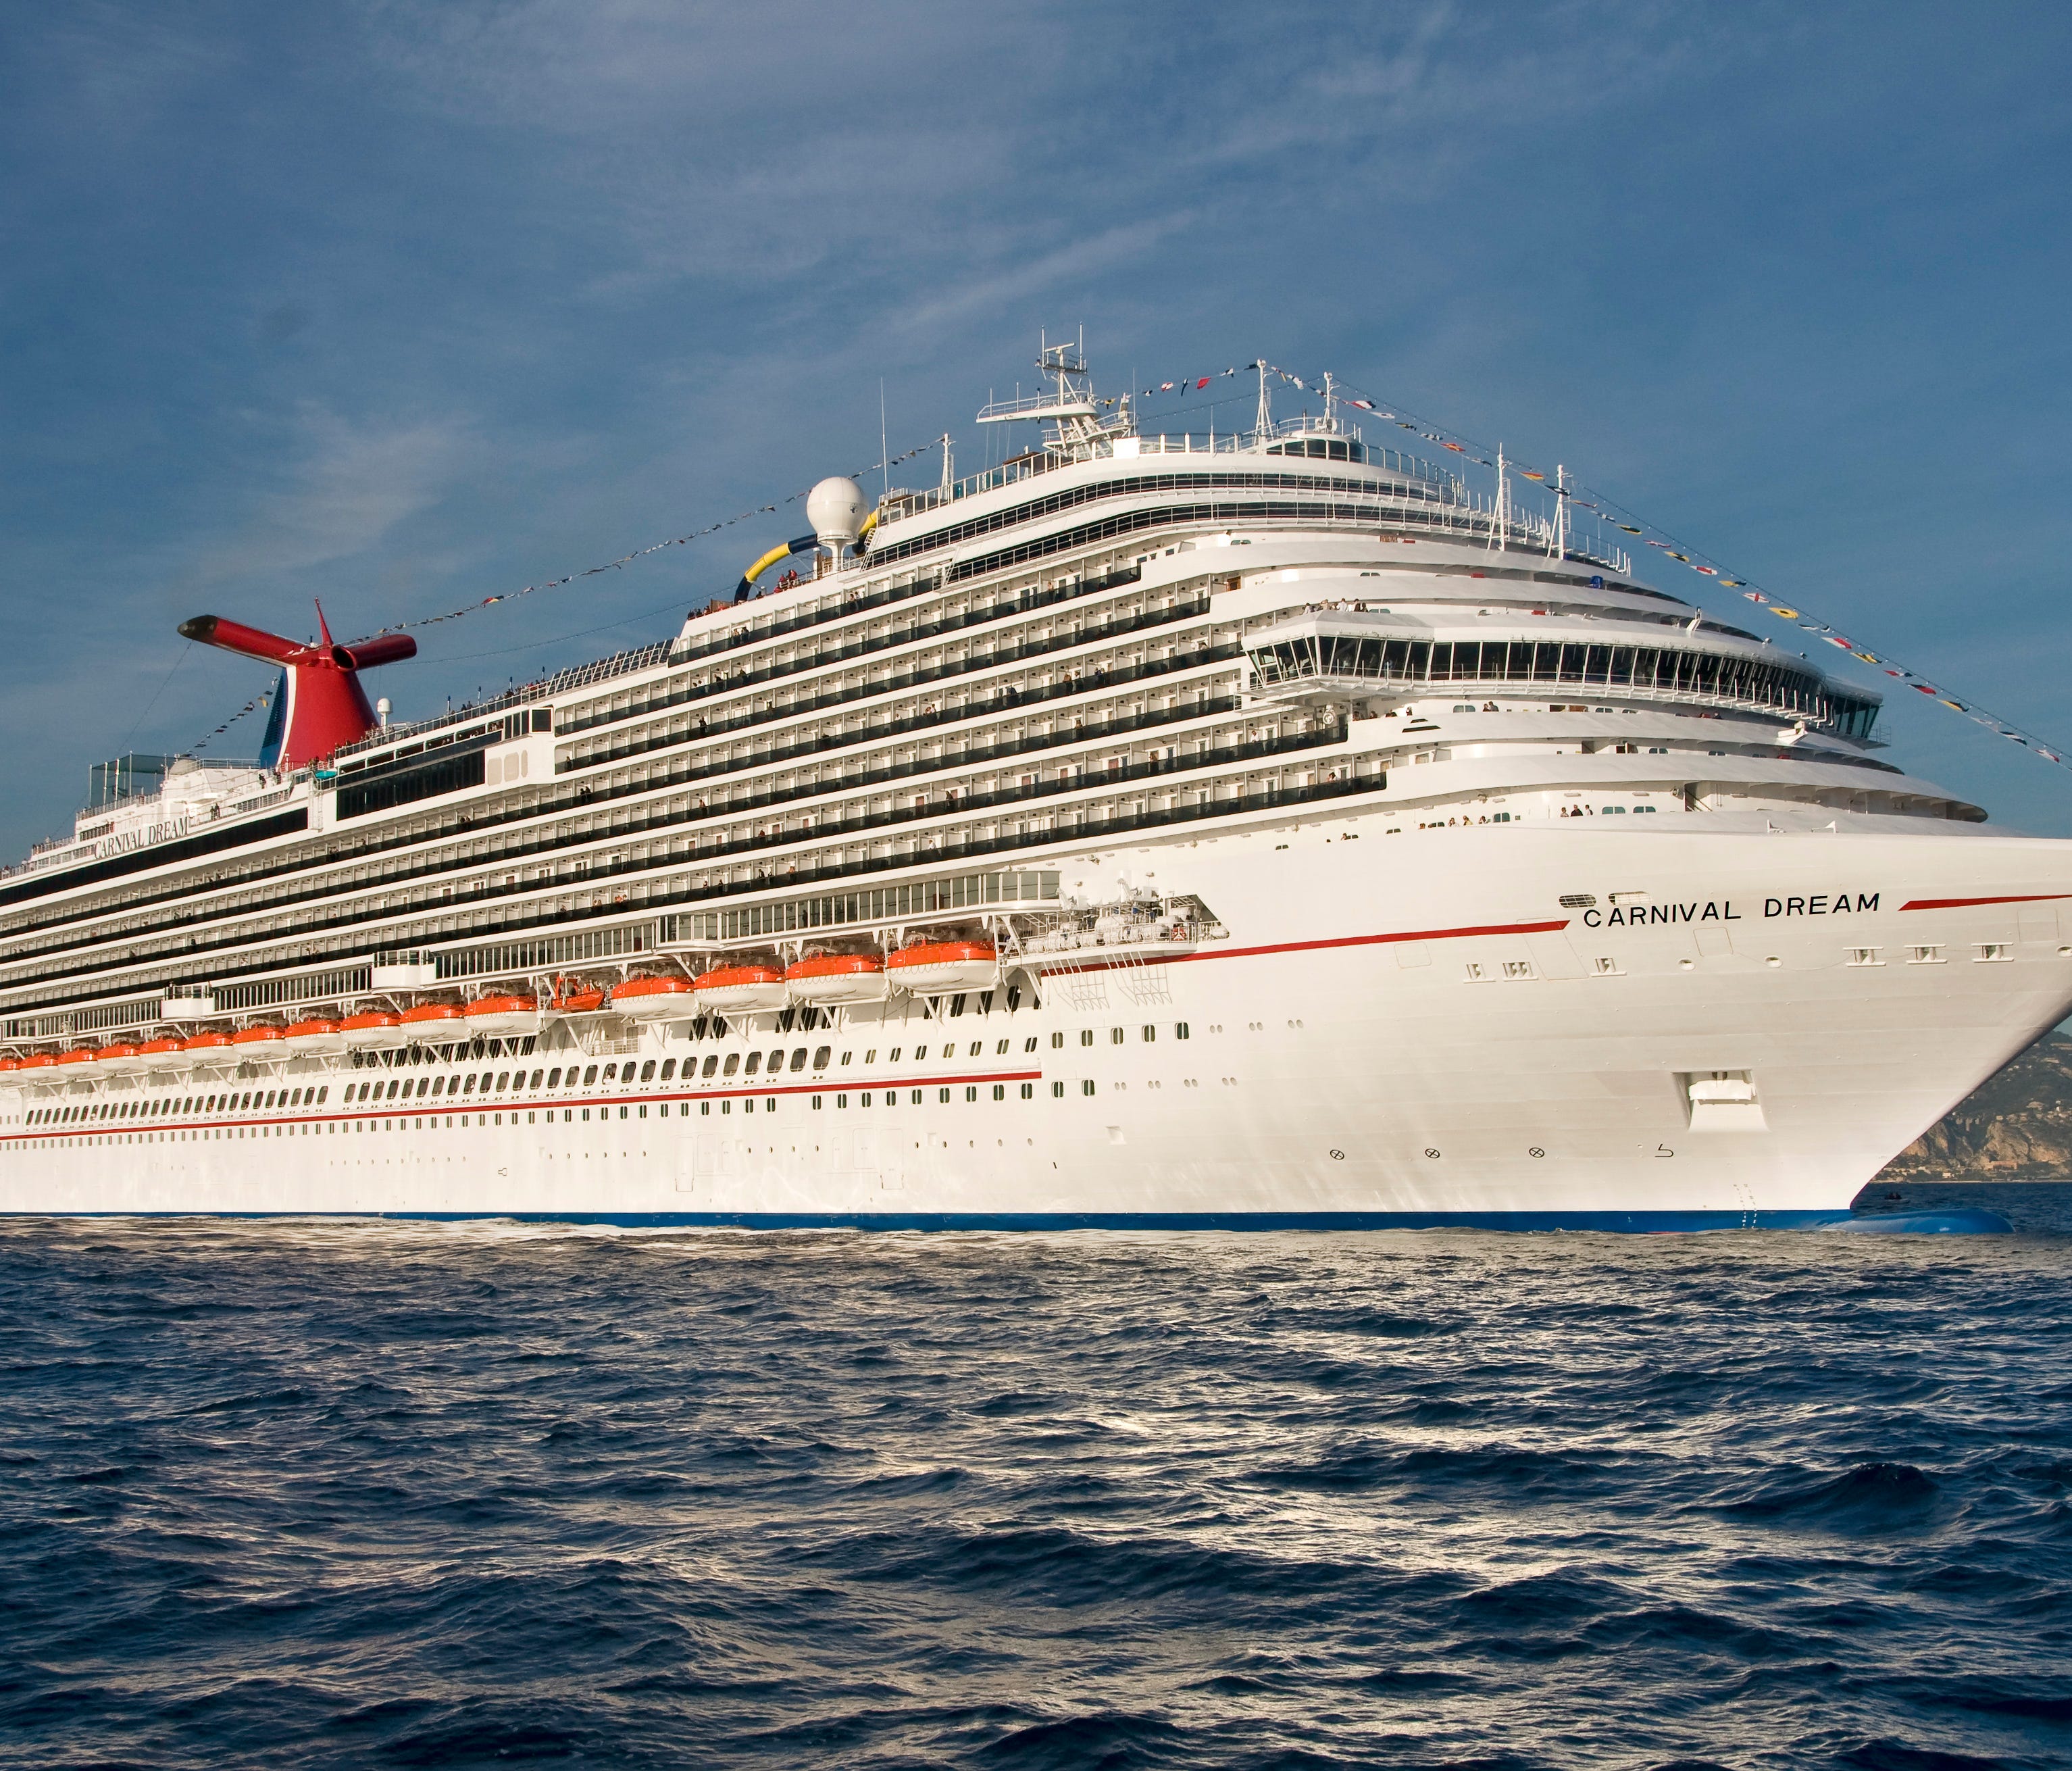 The 130,000-ton Carnival Dream, Carnival Cruise LinesÕ largest ship, is positioned off the coast of Monaco in October 2009. FOR EDITORIAL USE ONLY (Photo by Andy Newman/Carnival Cruise Lines/HO)  